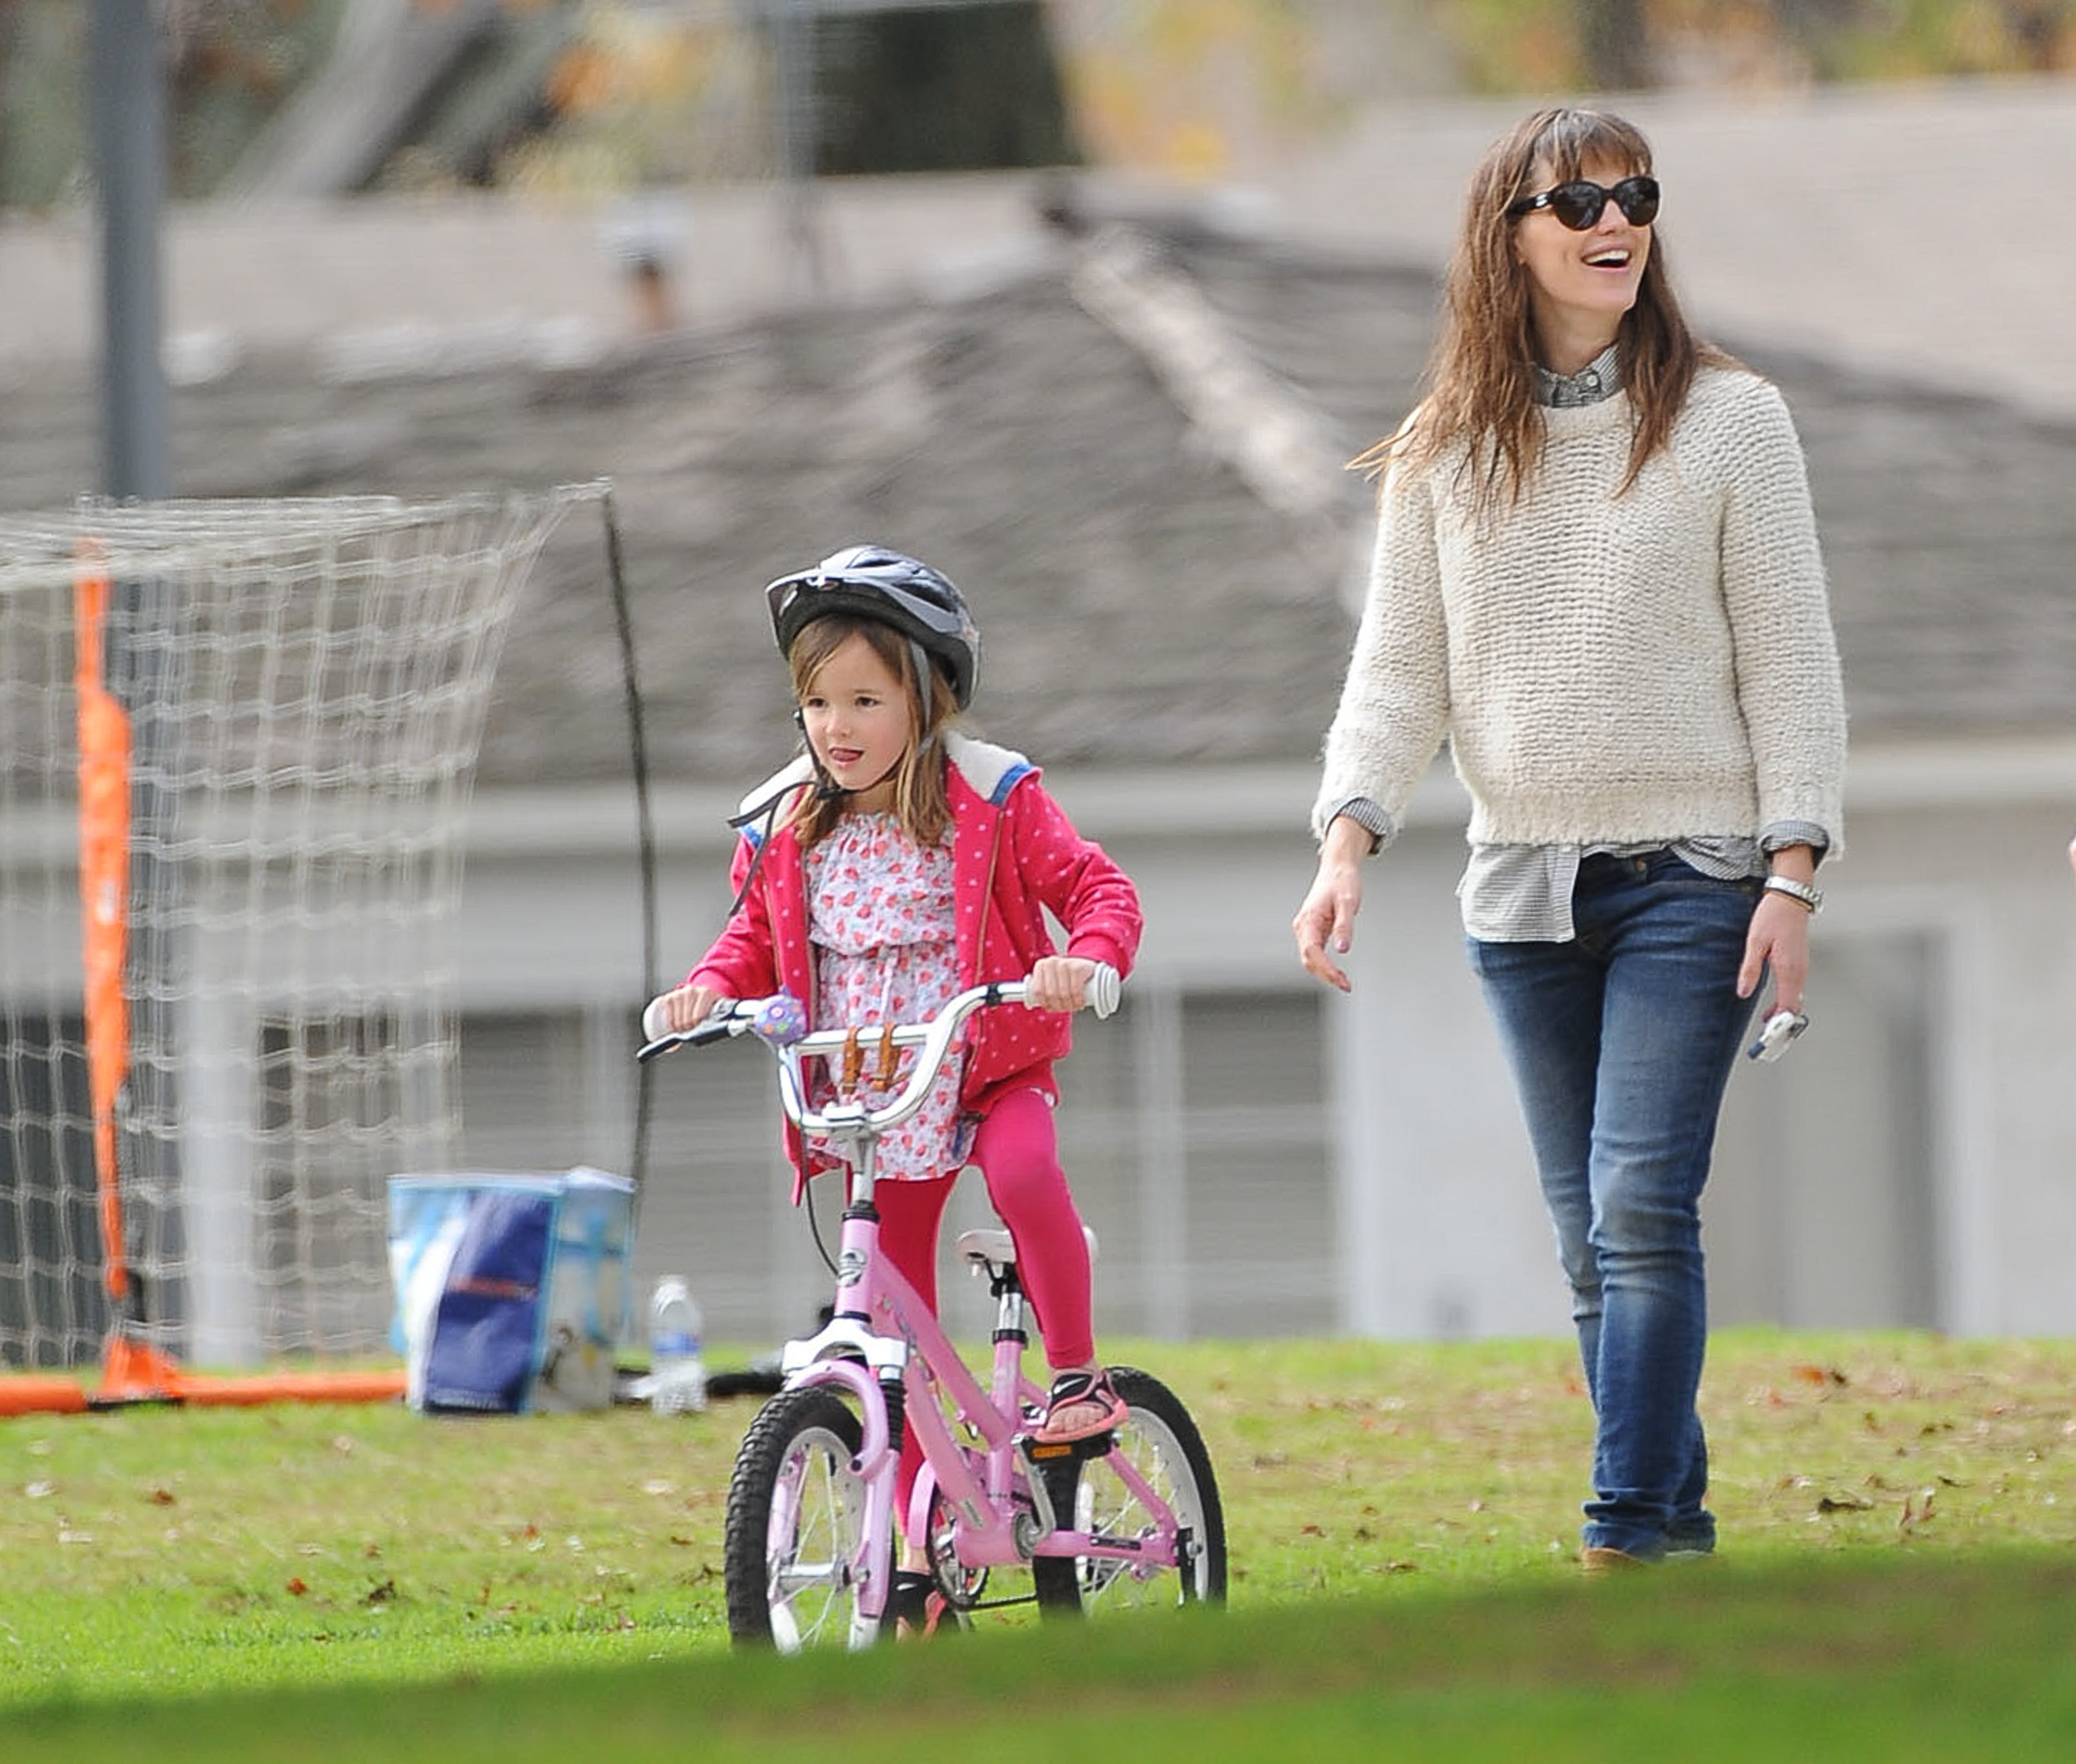 Jennifer Garner and Seraphina Affleck on February 8, 2014 in Los Angeles, California. | Source: Getty Images